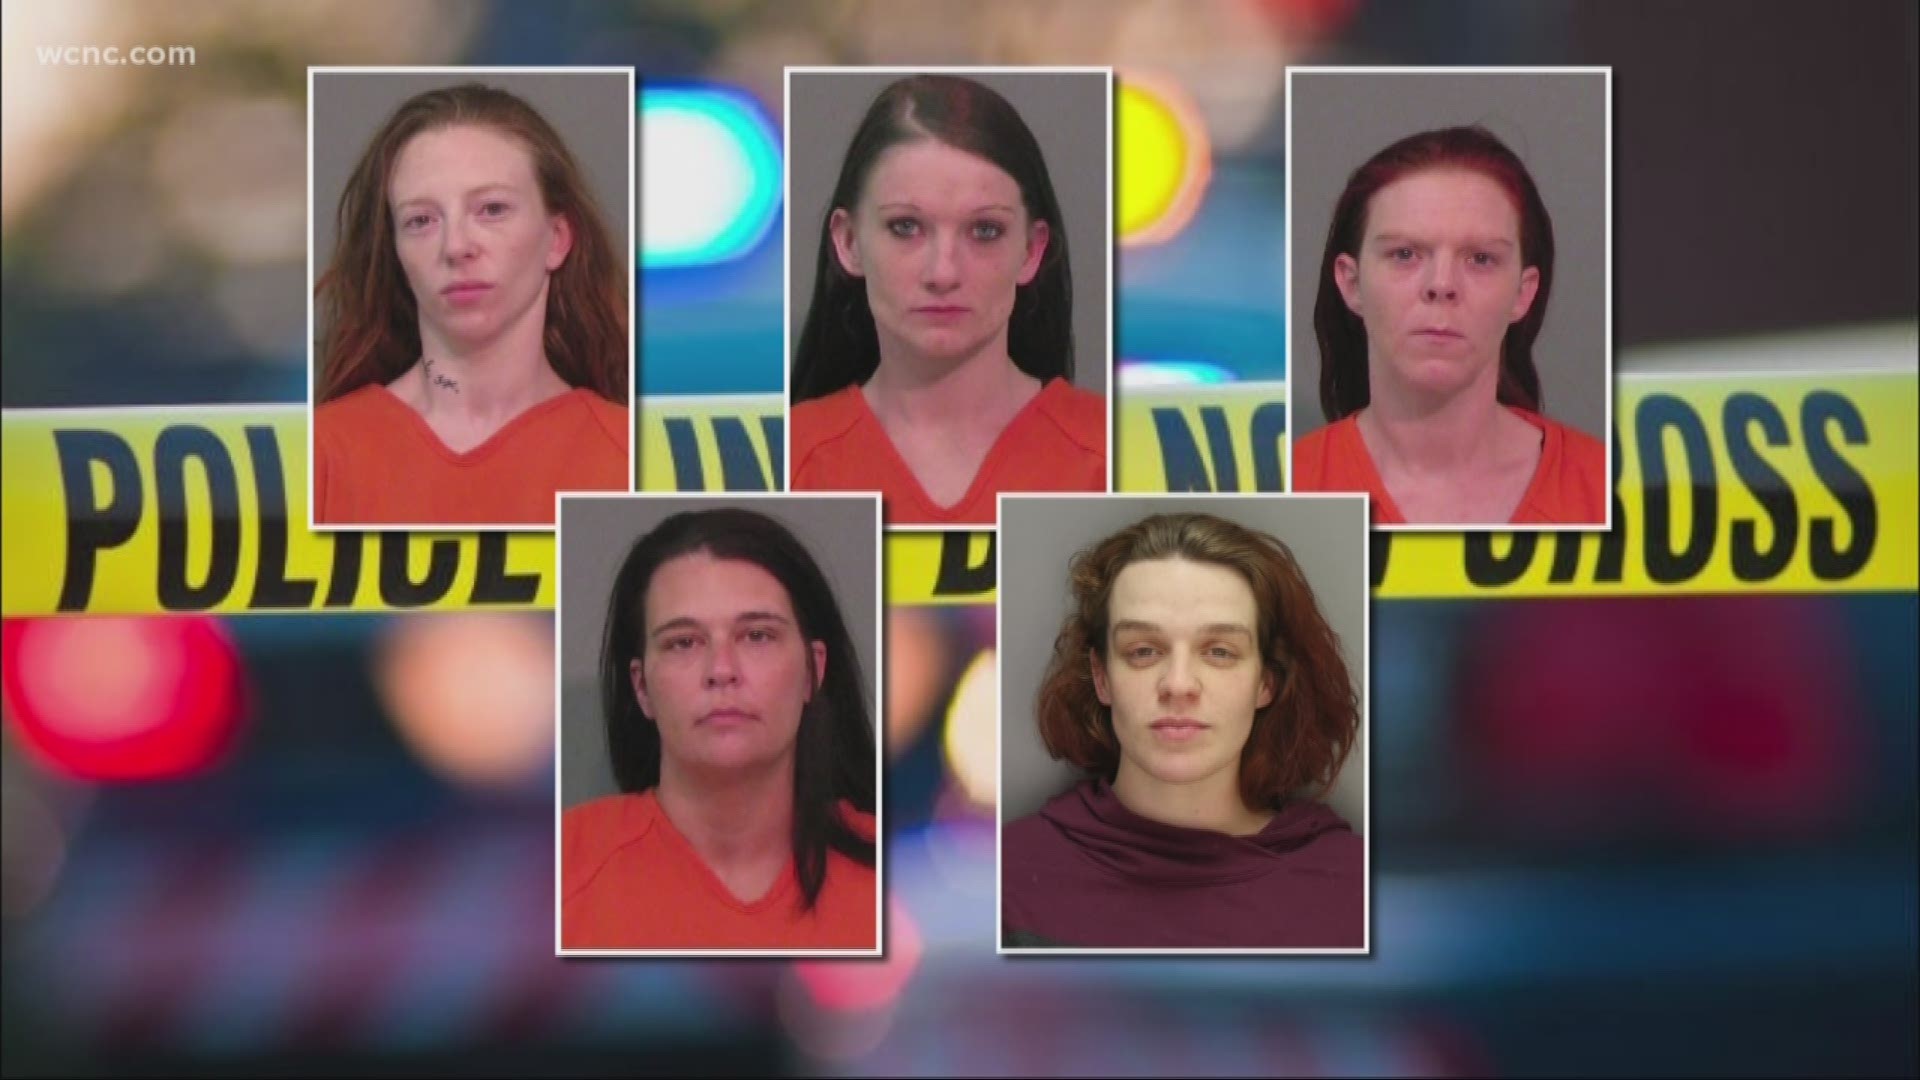 Five mothers were arrested in the past five days. All face up to 10 years in prison.